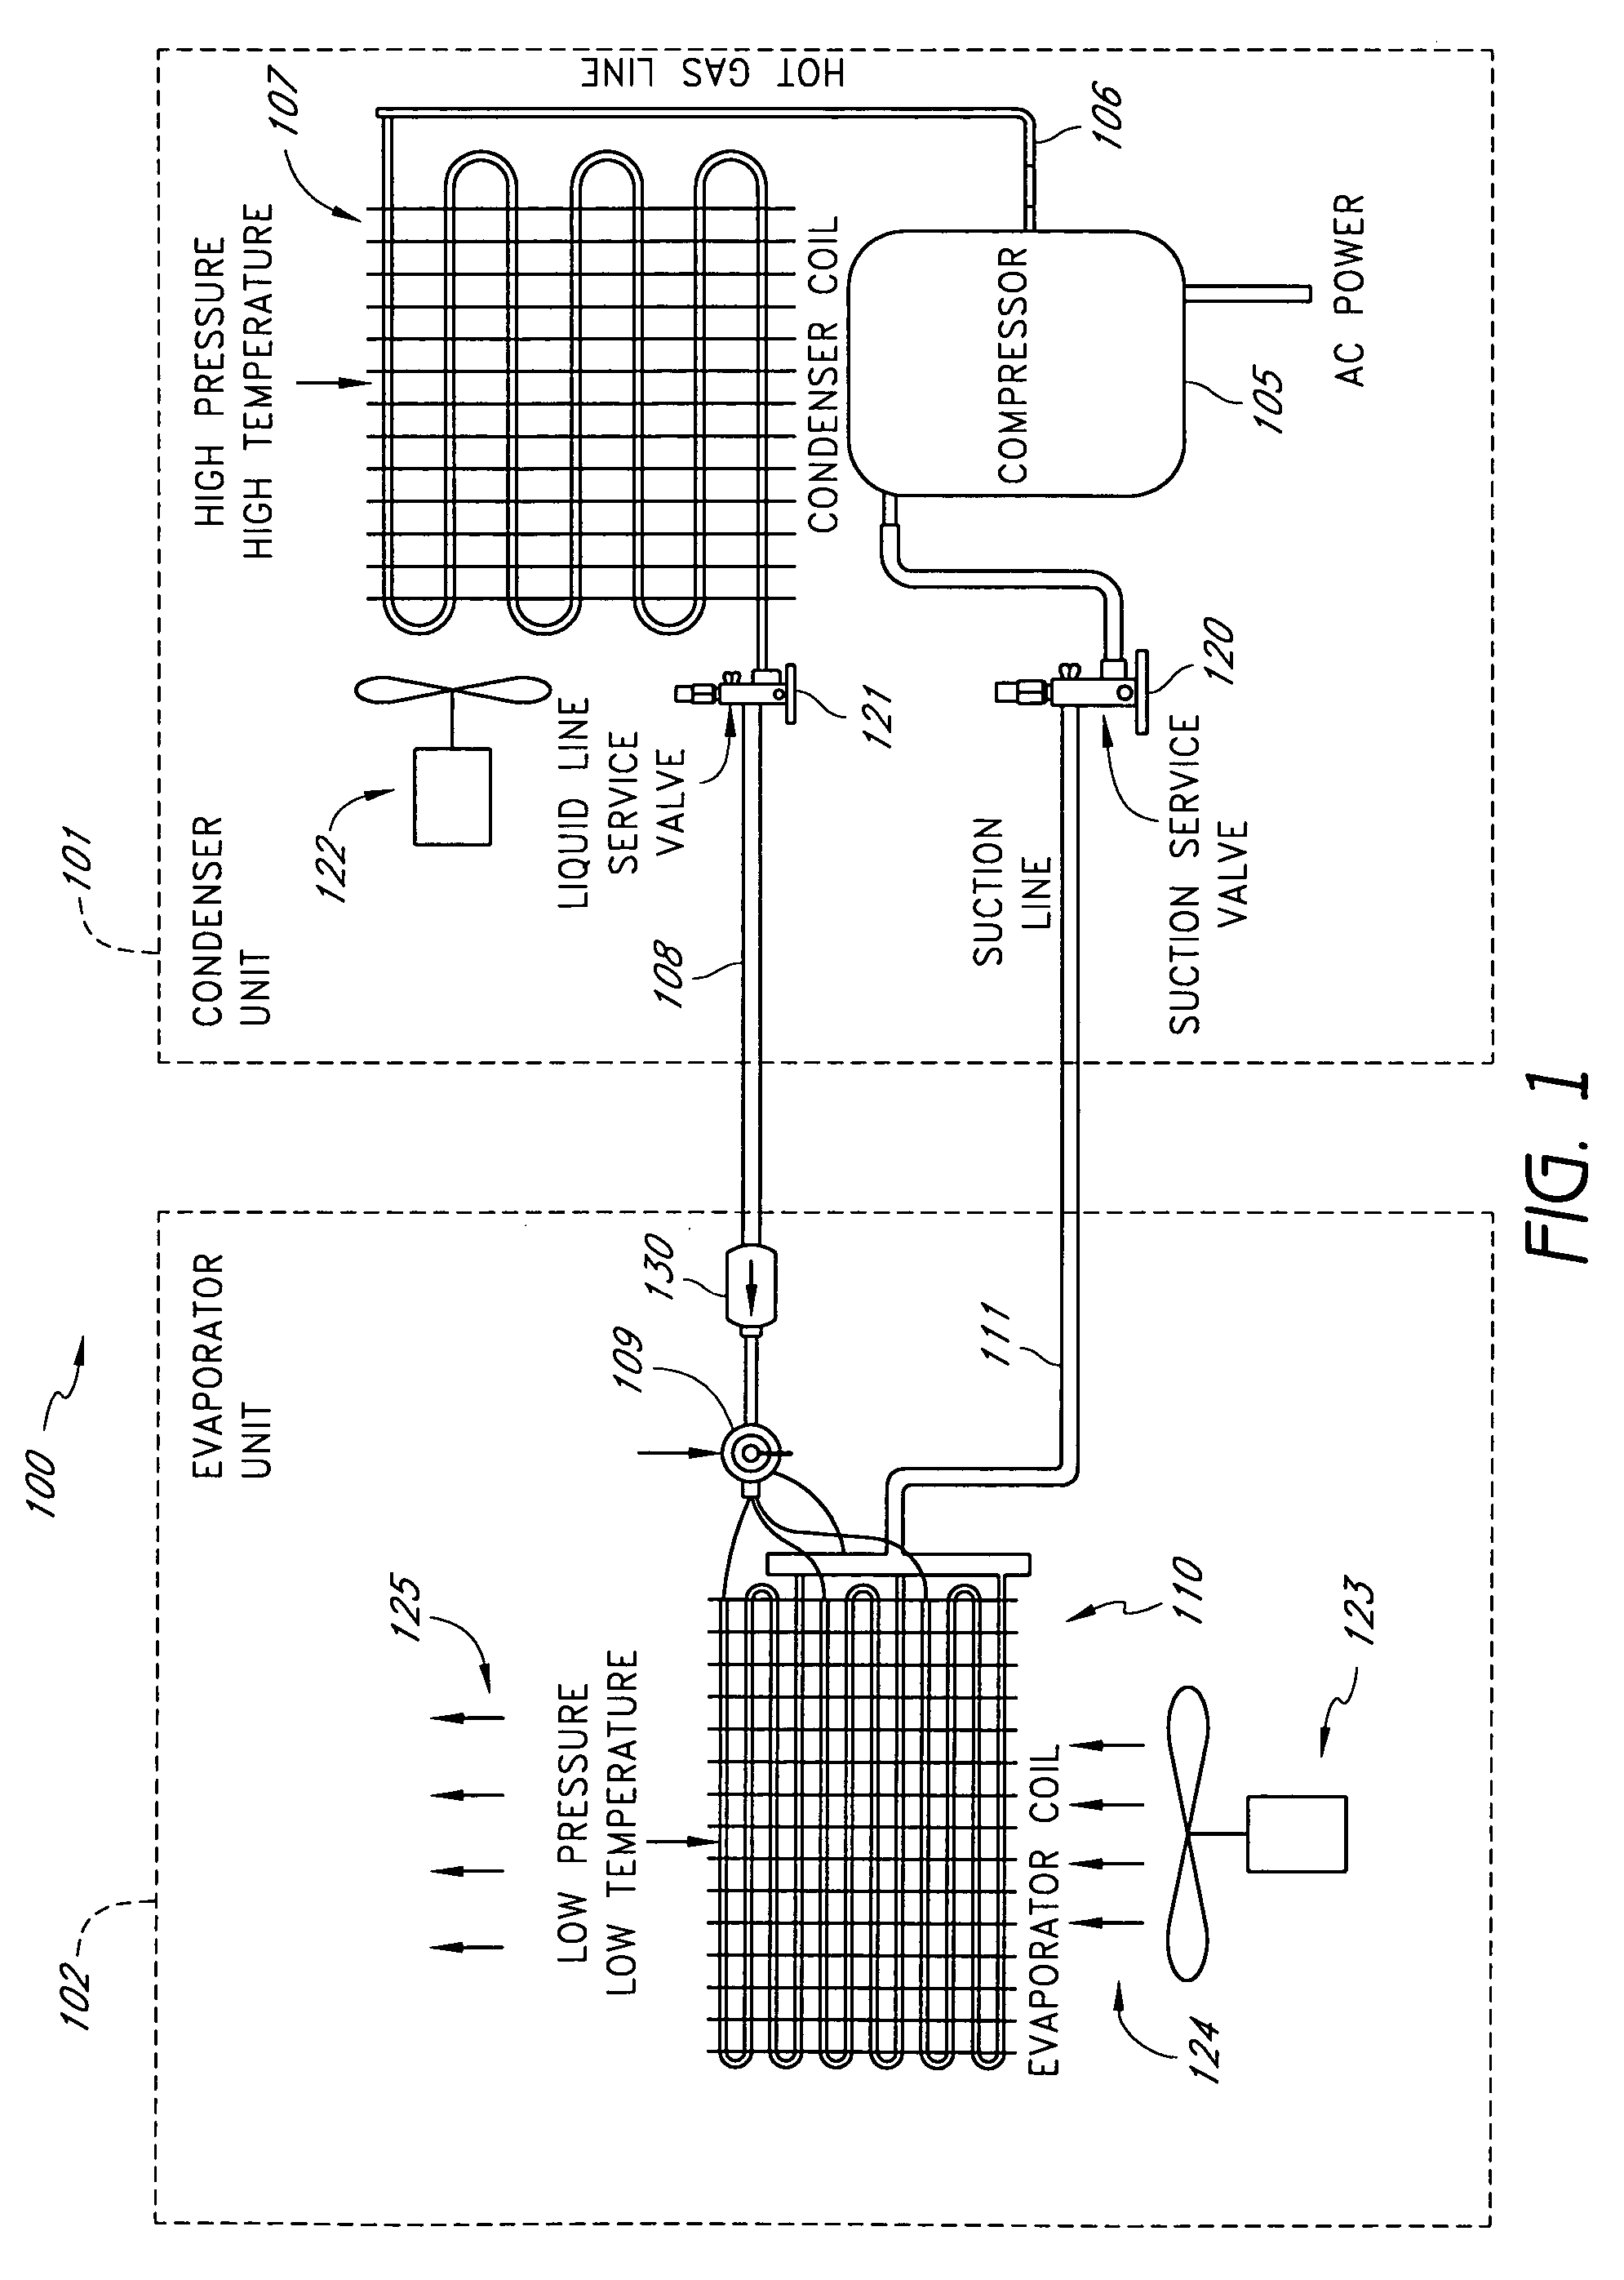 Method and apparatus for monitoring a condenser unit in a refrigerant-cycle system